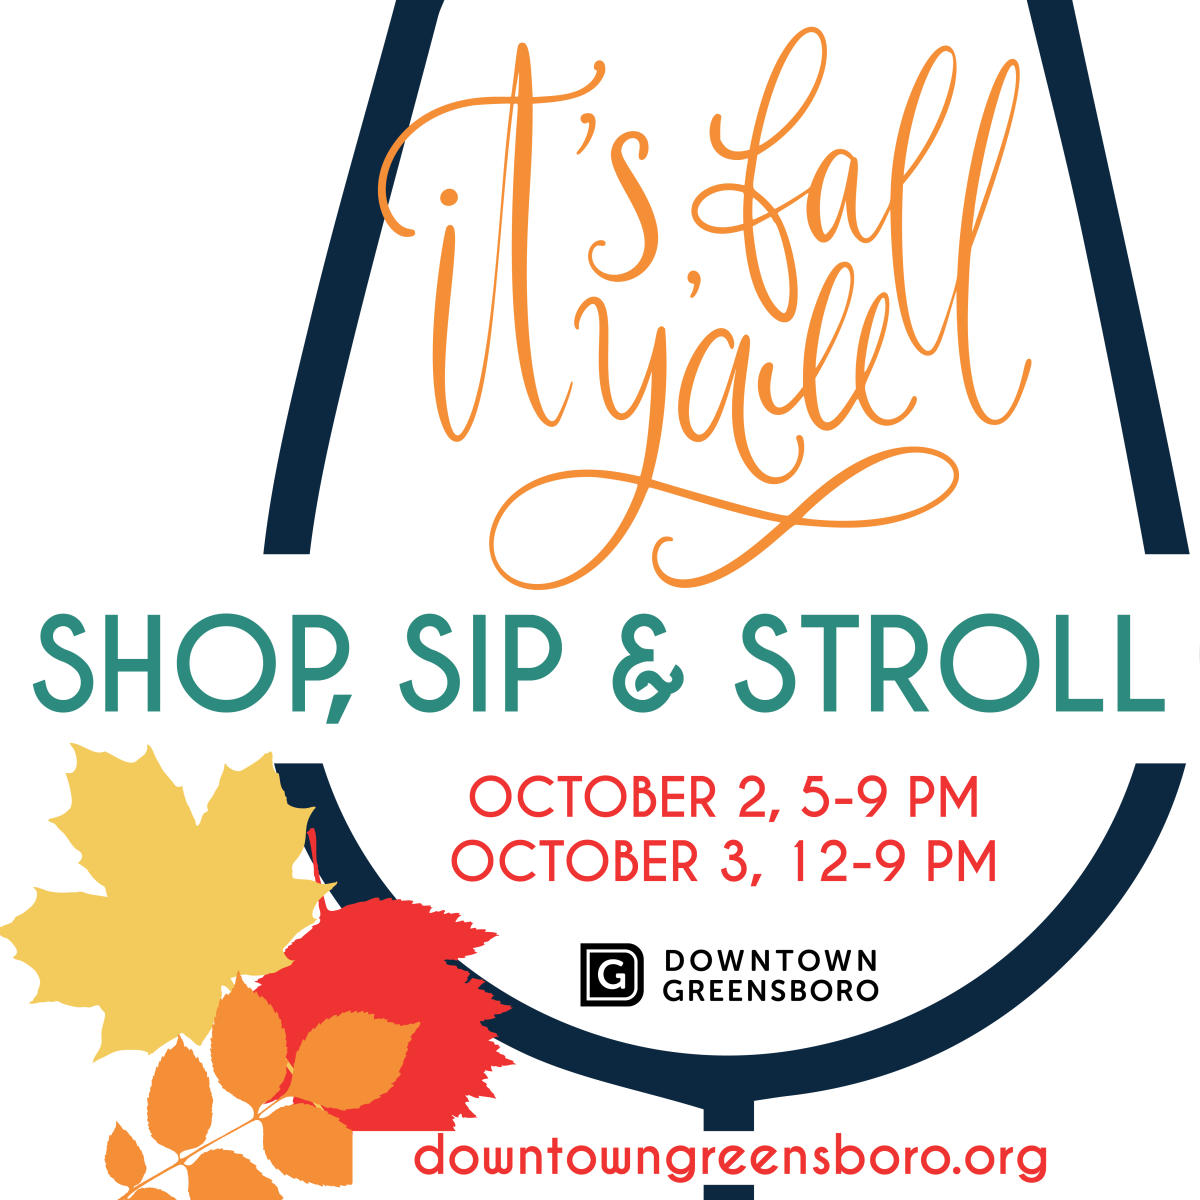 SHOP, SIP & STROLL DOWNTOWN First Friday and Saturday in October